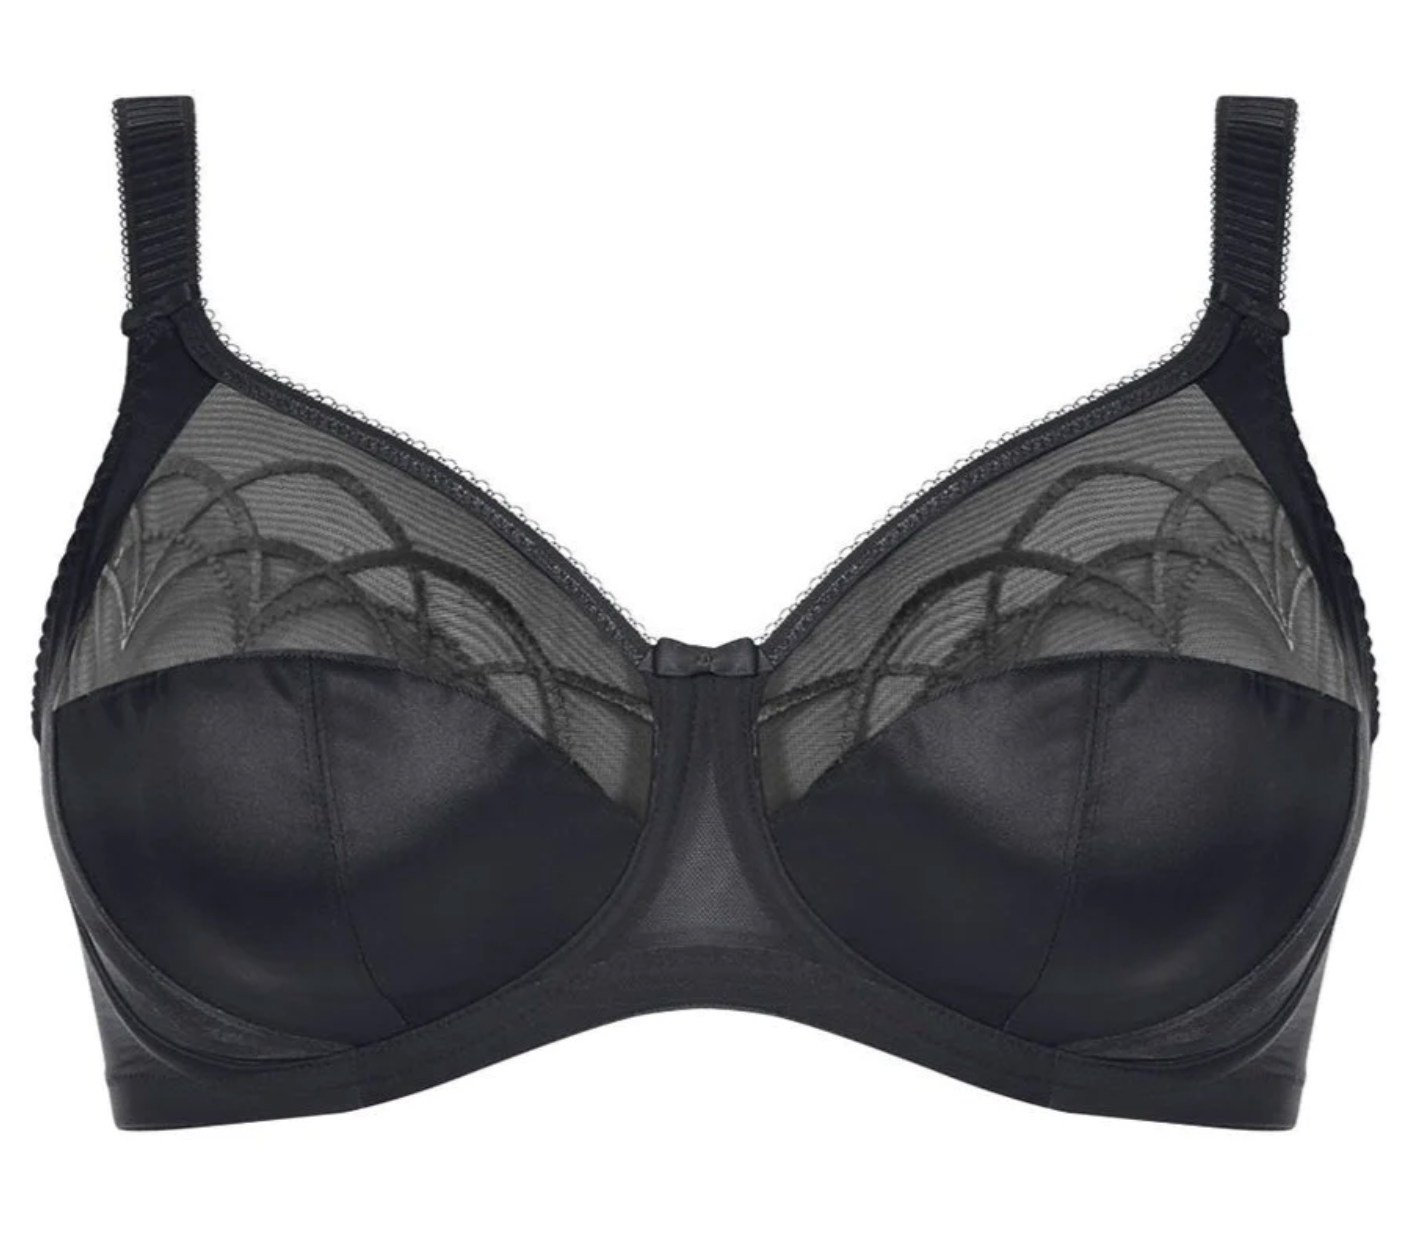 Elomi Cate Underwired Full Cup Banded Bra